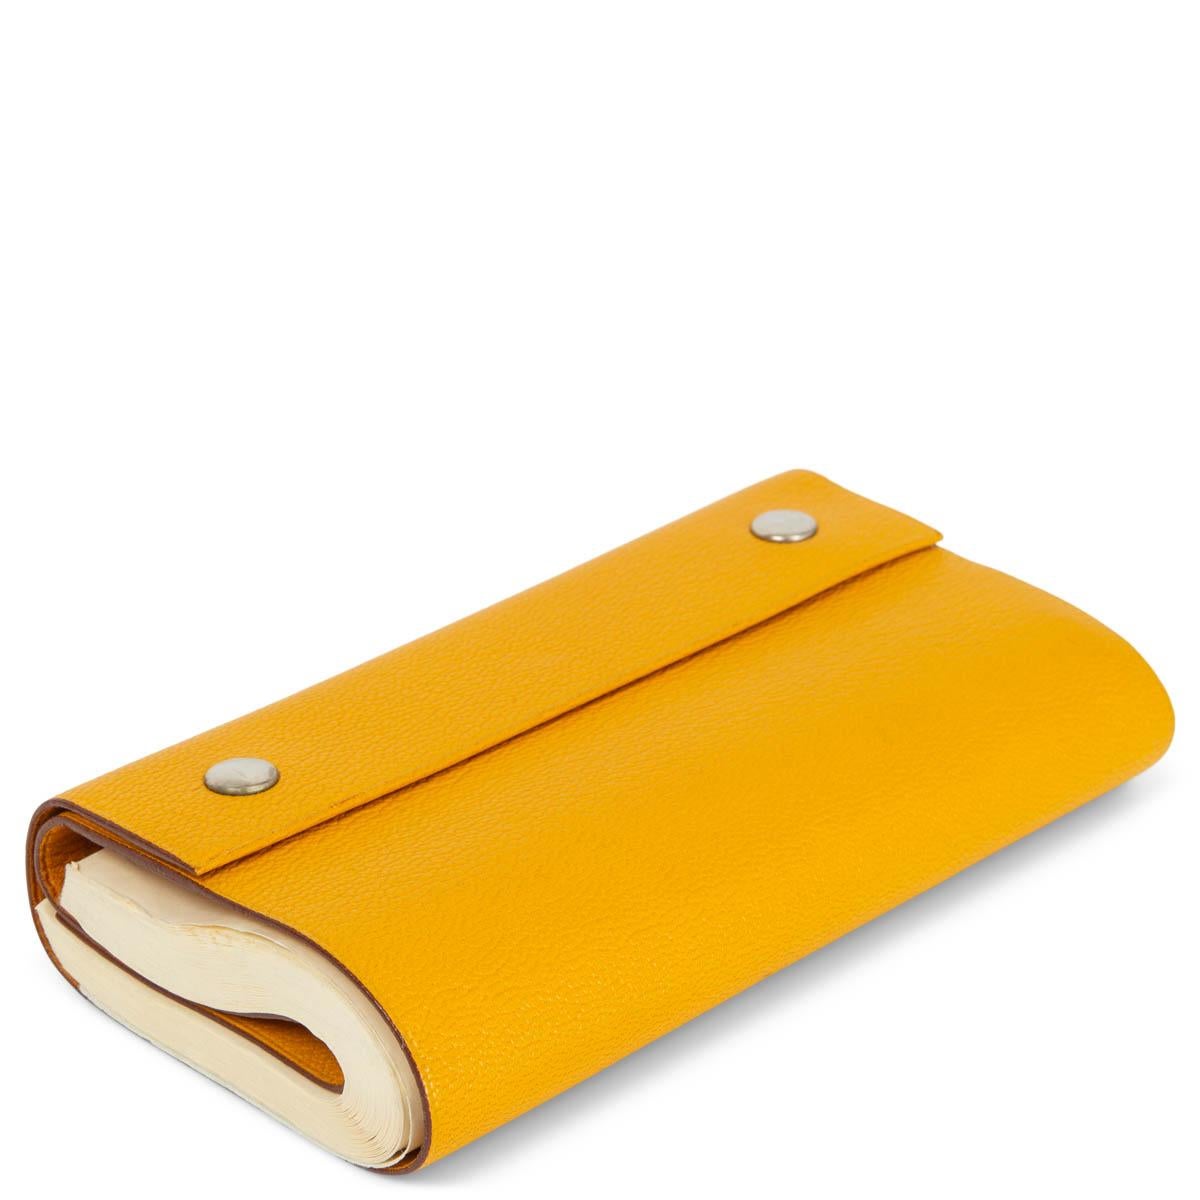 100% authentic Hermès Cahier Roule Roll Notebook in Jaune (yellow) Chèvre Mysore Leather. Shows some pen marks on the backside. Overall in good condition. Comes with dust bag. 

Measurements
Width	13cm (5.1in)
Height	8cm (3.1in)
Depth	3cm